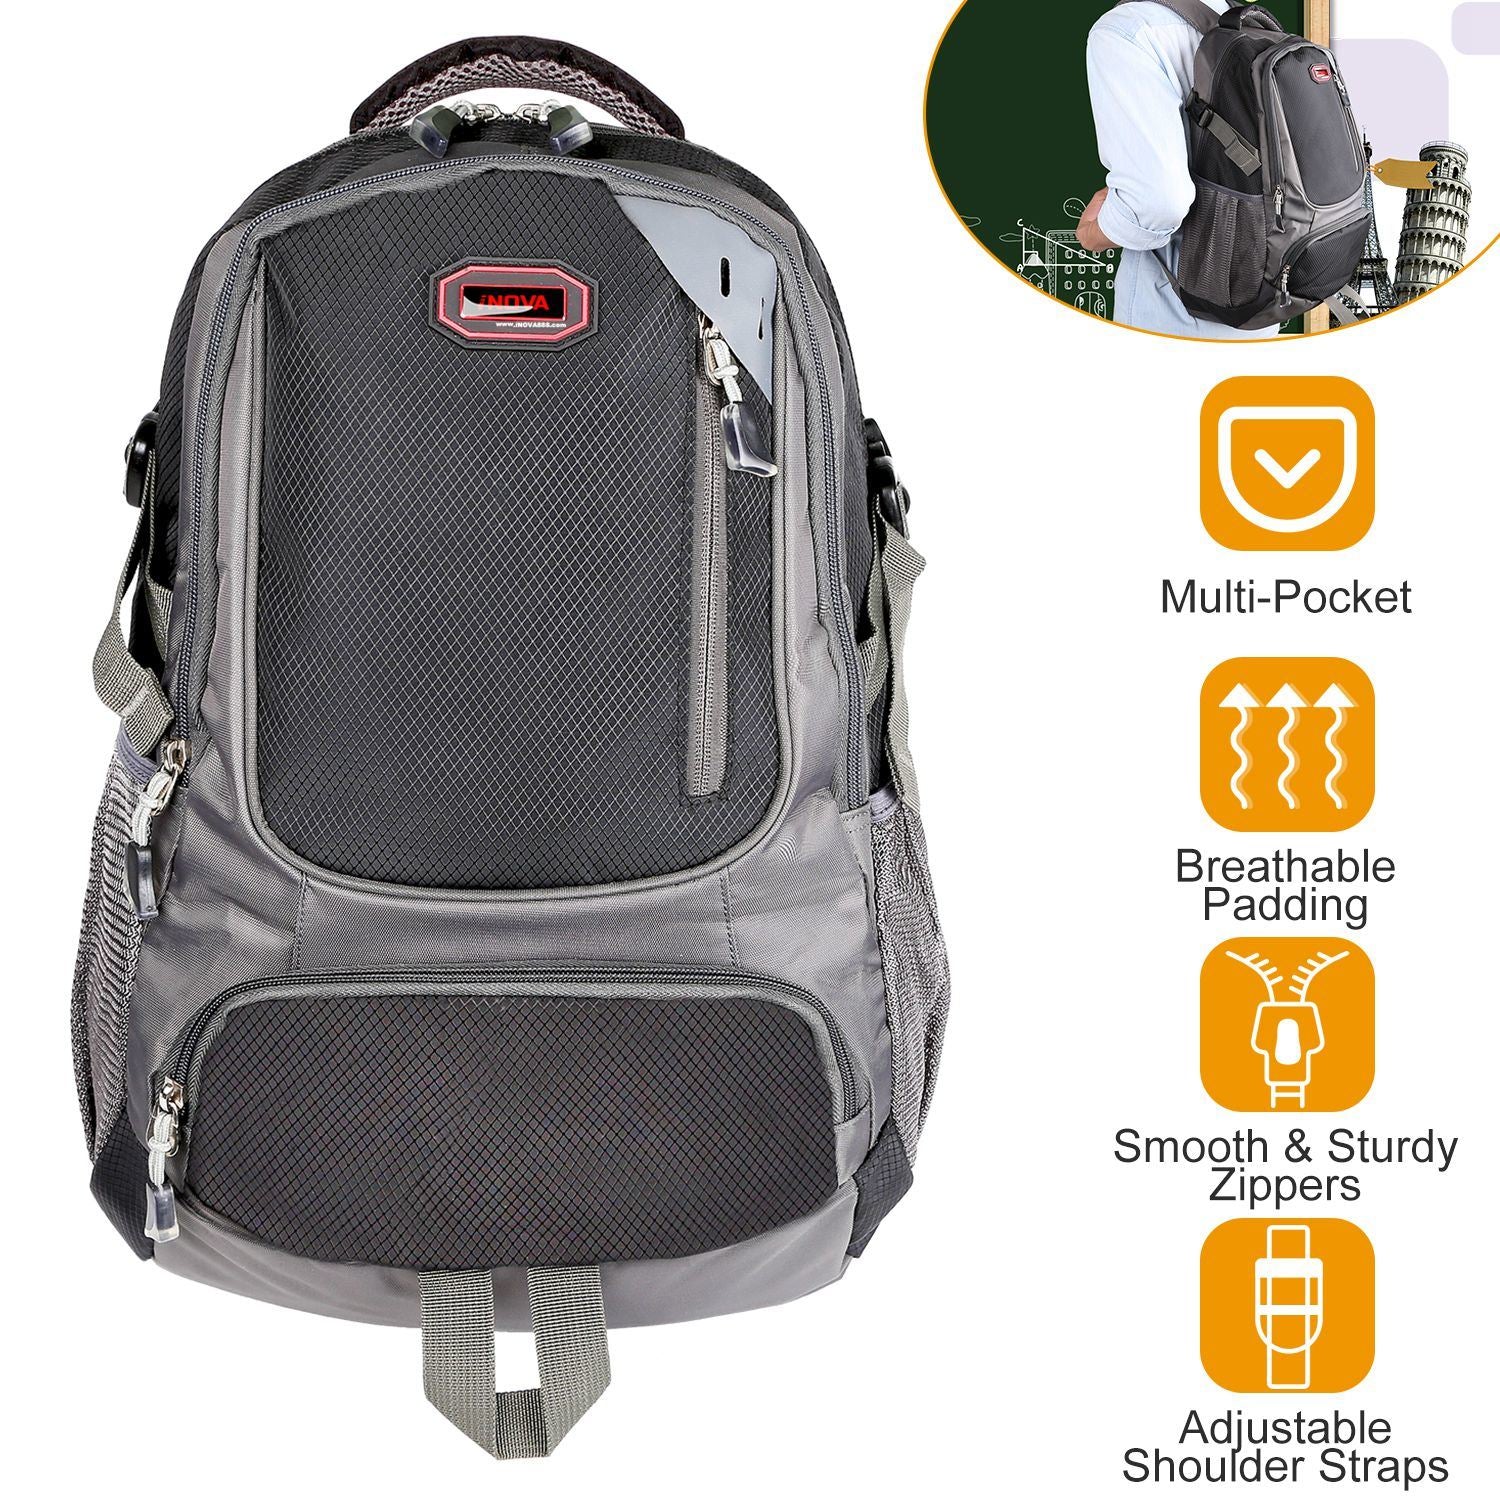 An image of the Unisex School Backpack Casual Travel Shoulder Bag W/ Adjustable Straps Dual-Water Bottle Pouch with adjustable shoulder straps and a portable handle design.